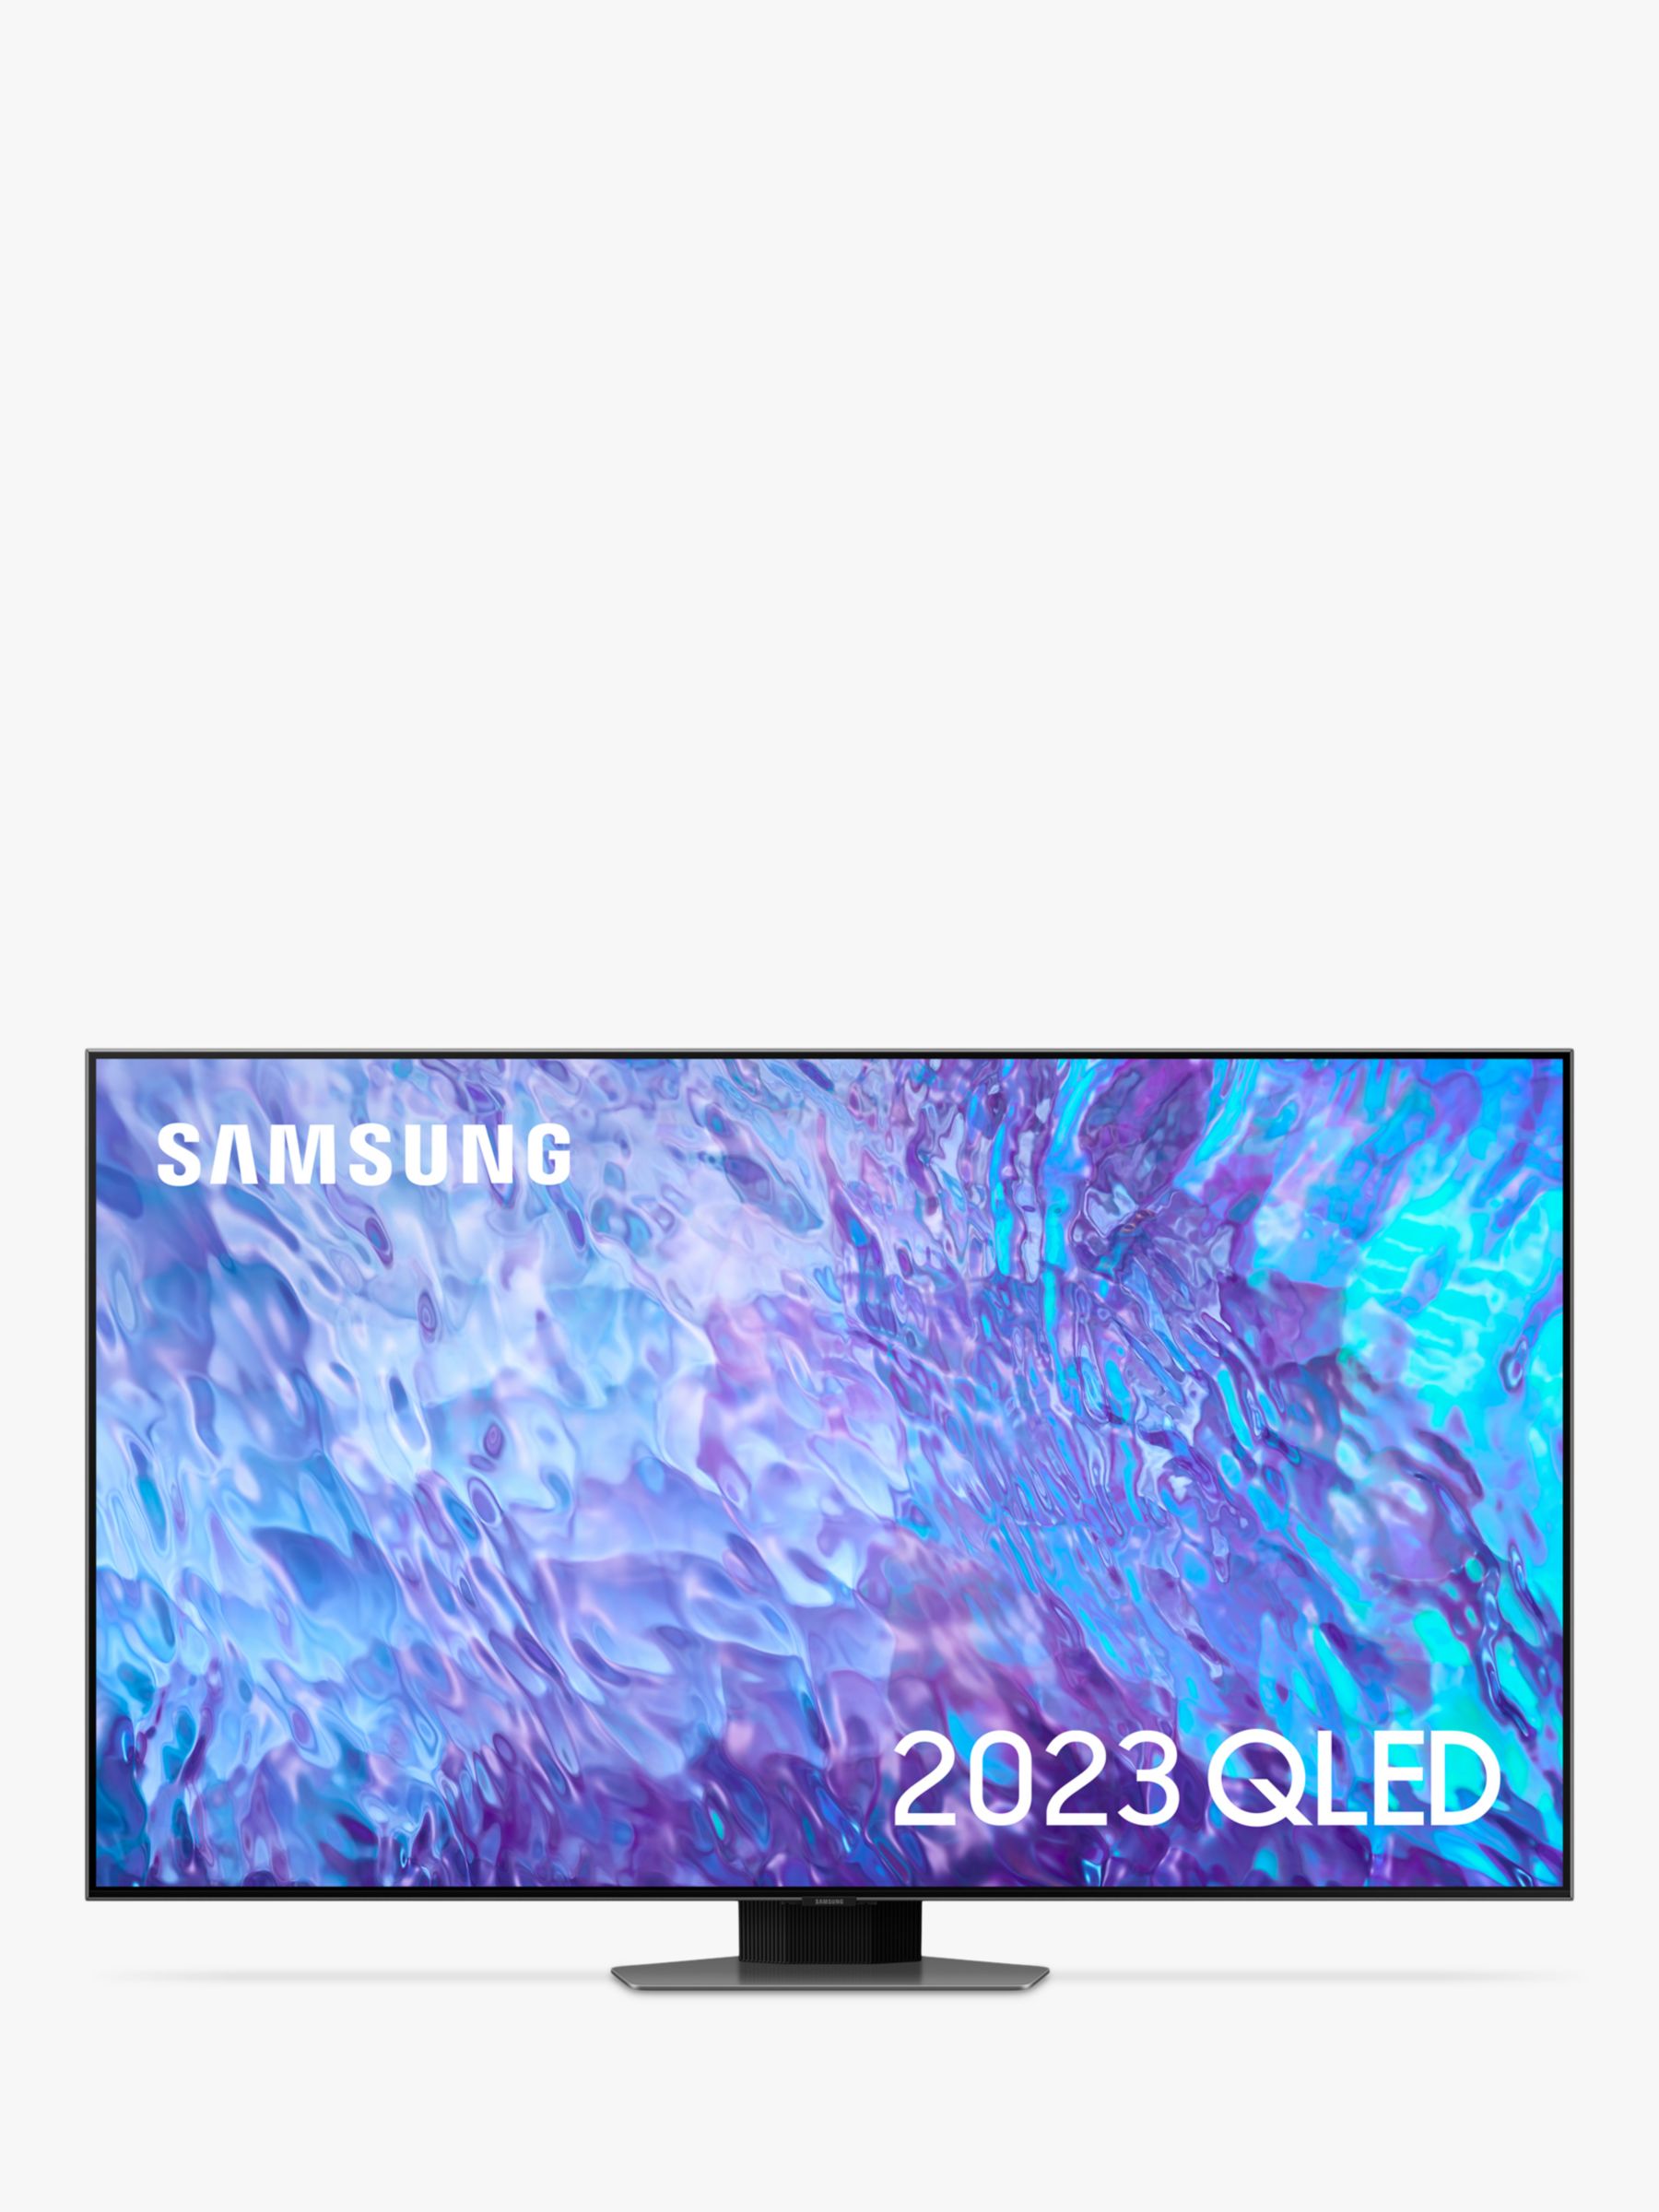 Samsung QE85Q80C (2023) QLED HDR 4K Ultra HD Smart TV, 85 inch with TVPlus & Dolby Atmos, Carbon Silver